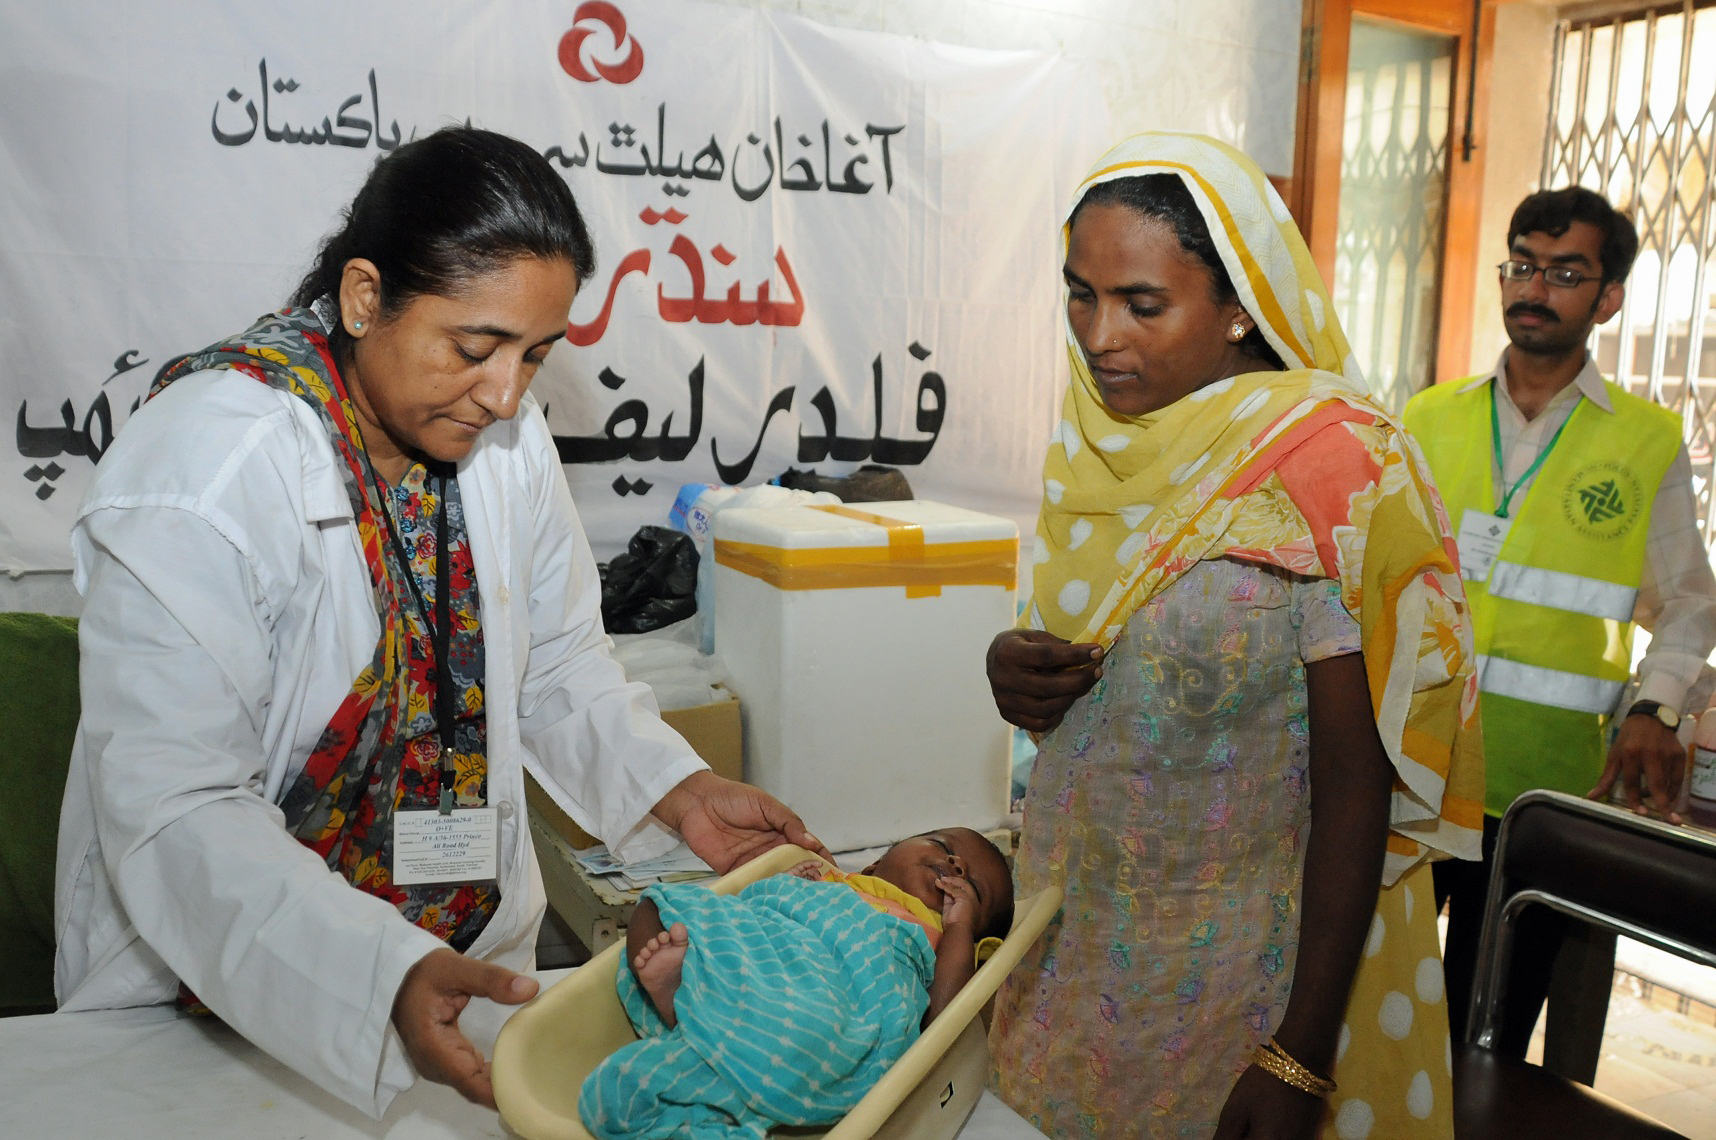 An Aga Khan Health Service doctor examines an infant at a FOCUS relief camp in Hyderabad, Pakistan. Photo: Ismaili Council for Pakistan / Al Jaleel